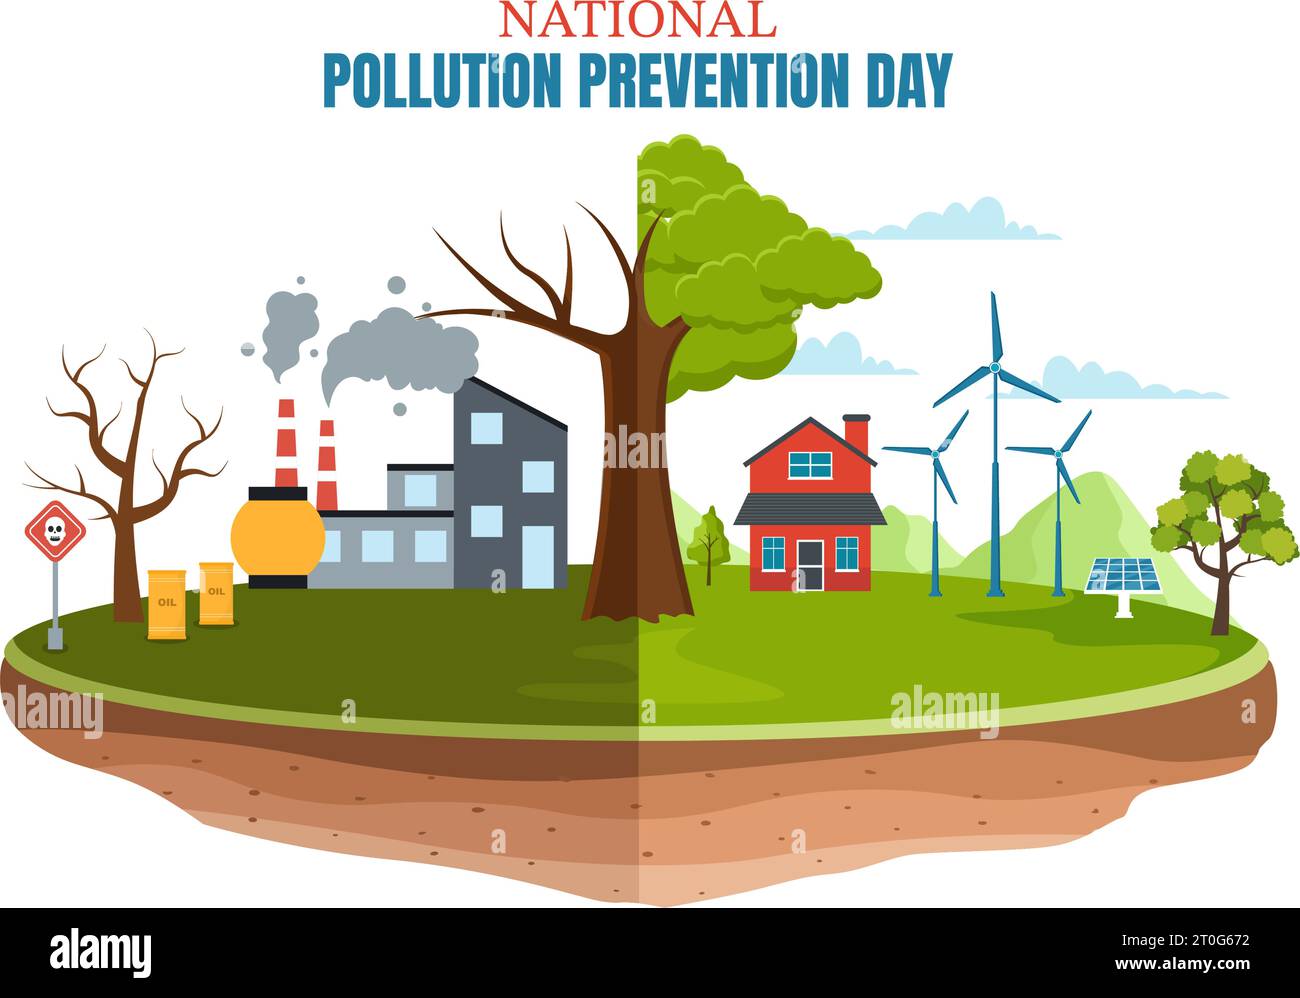 National Pollution Prevention Day Vector Illustration on 2 December for Awareness Campaign Factory, Forest or Vehicle Problems in Cartoon Background Stock Vector